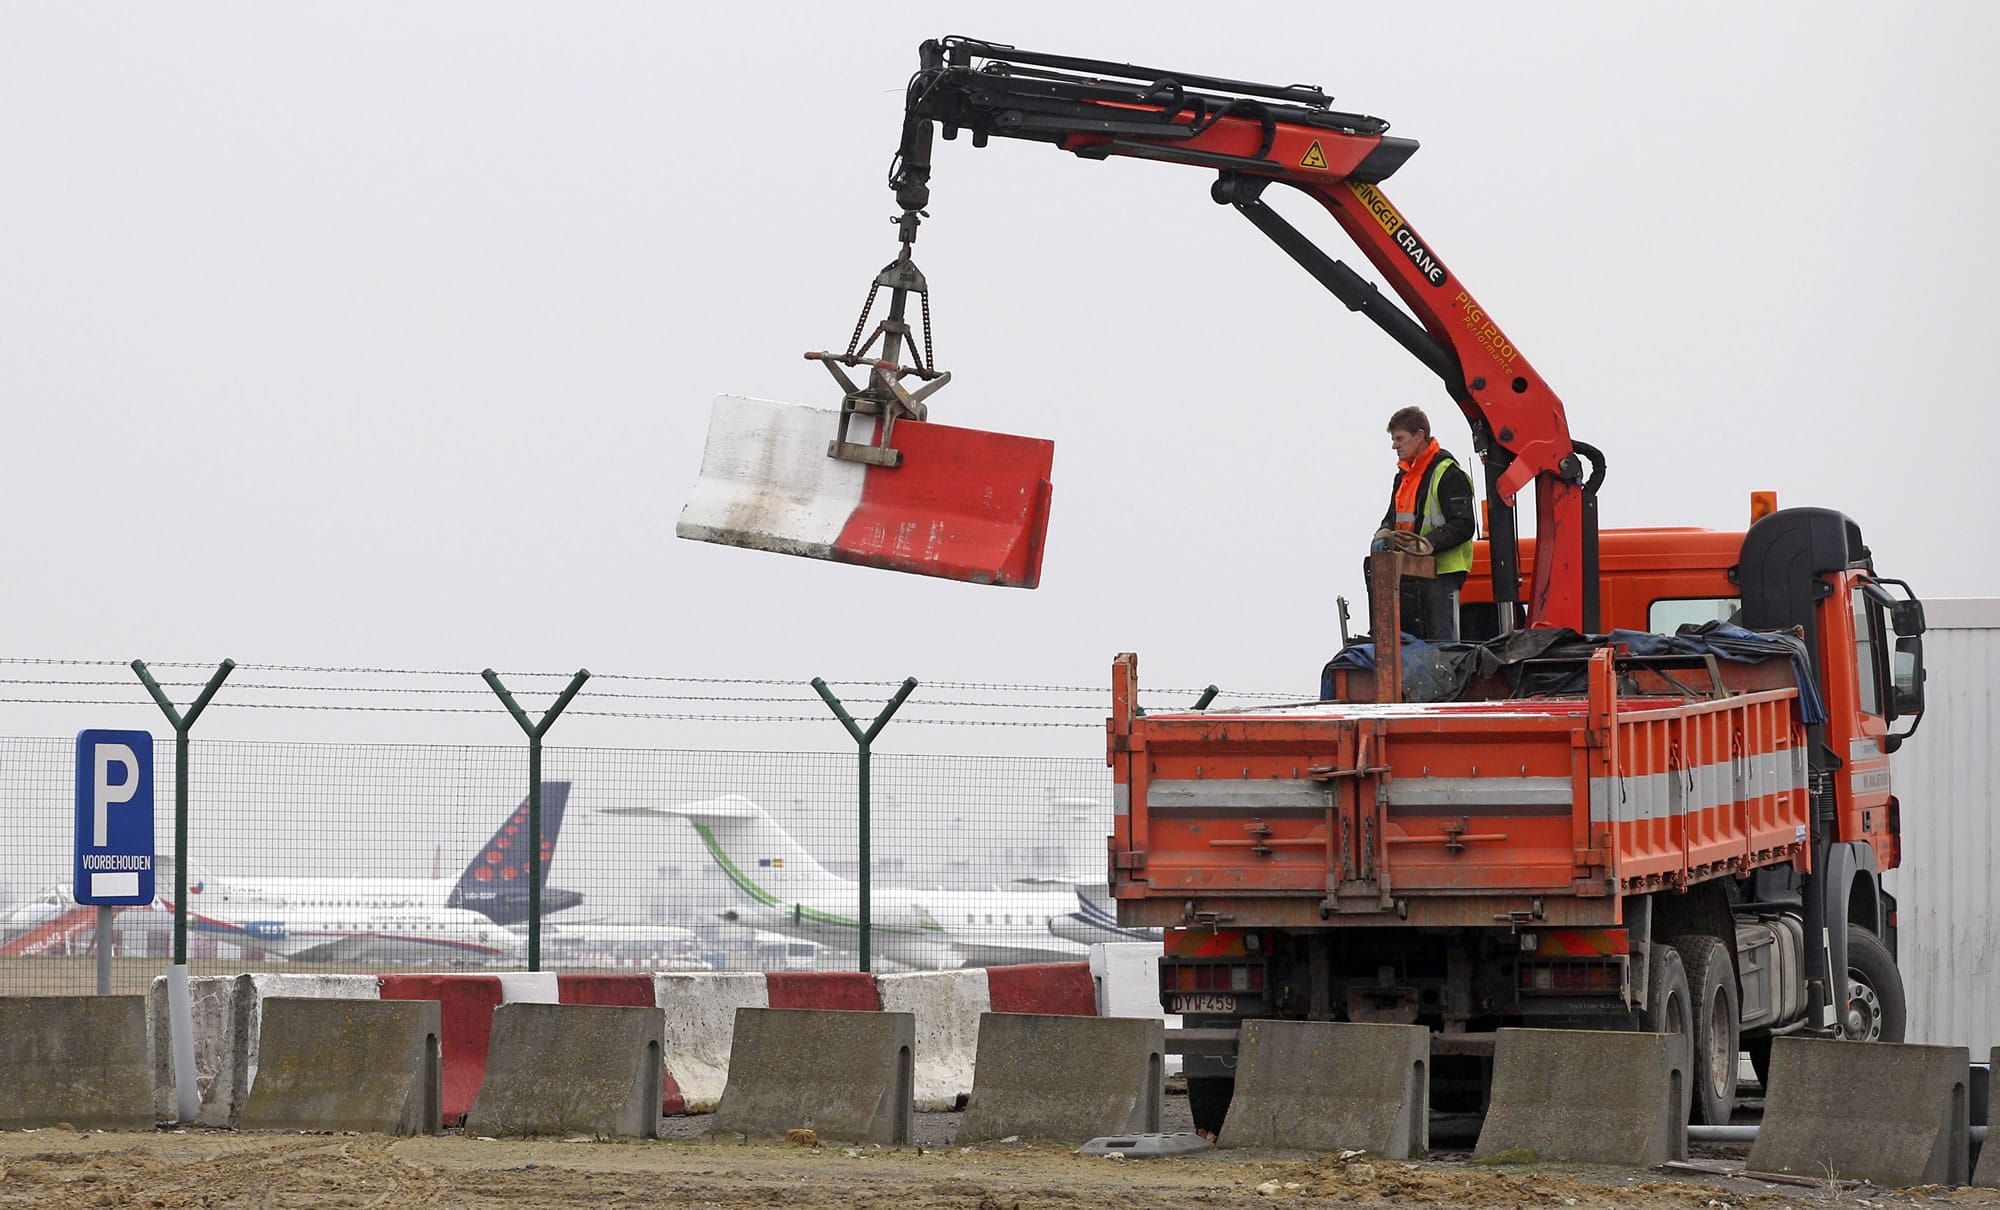 Workers place concrete blocks to block access to a security fence next to the tarmac at Brussels international airport Feb.